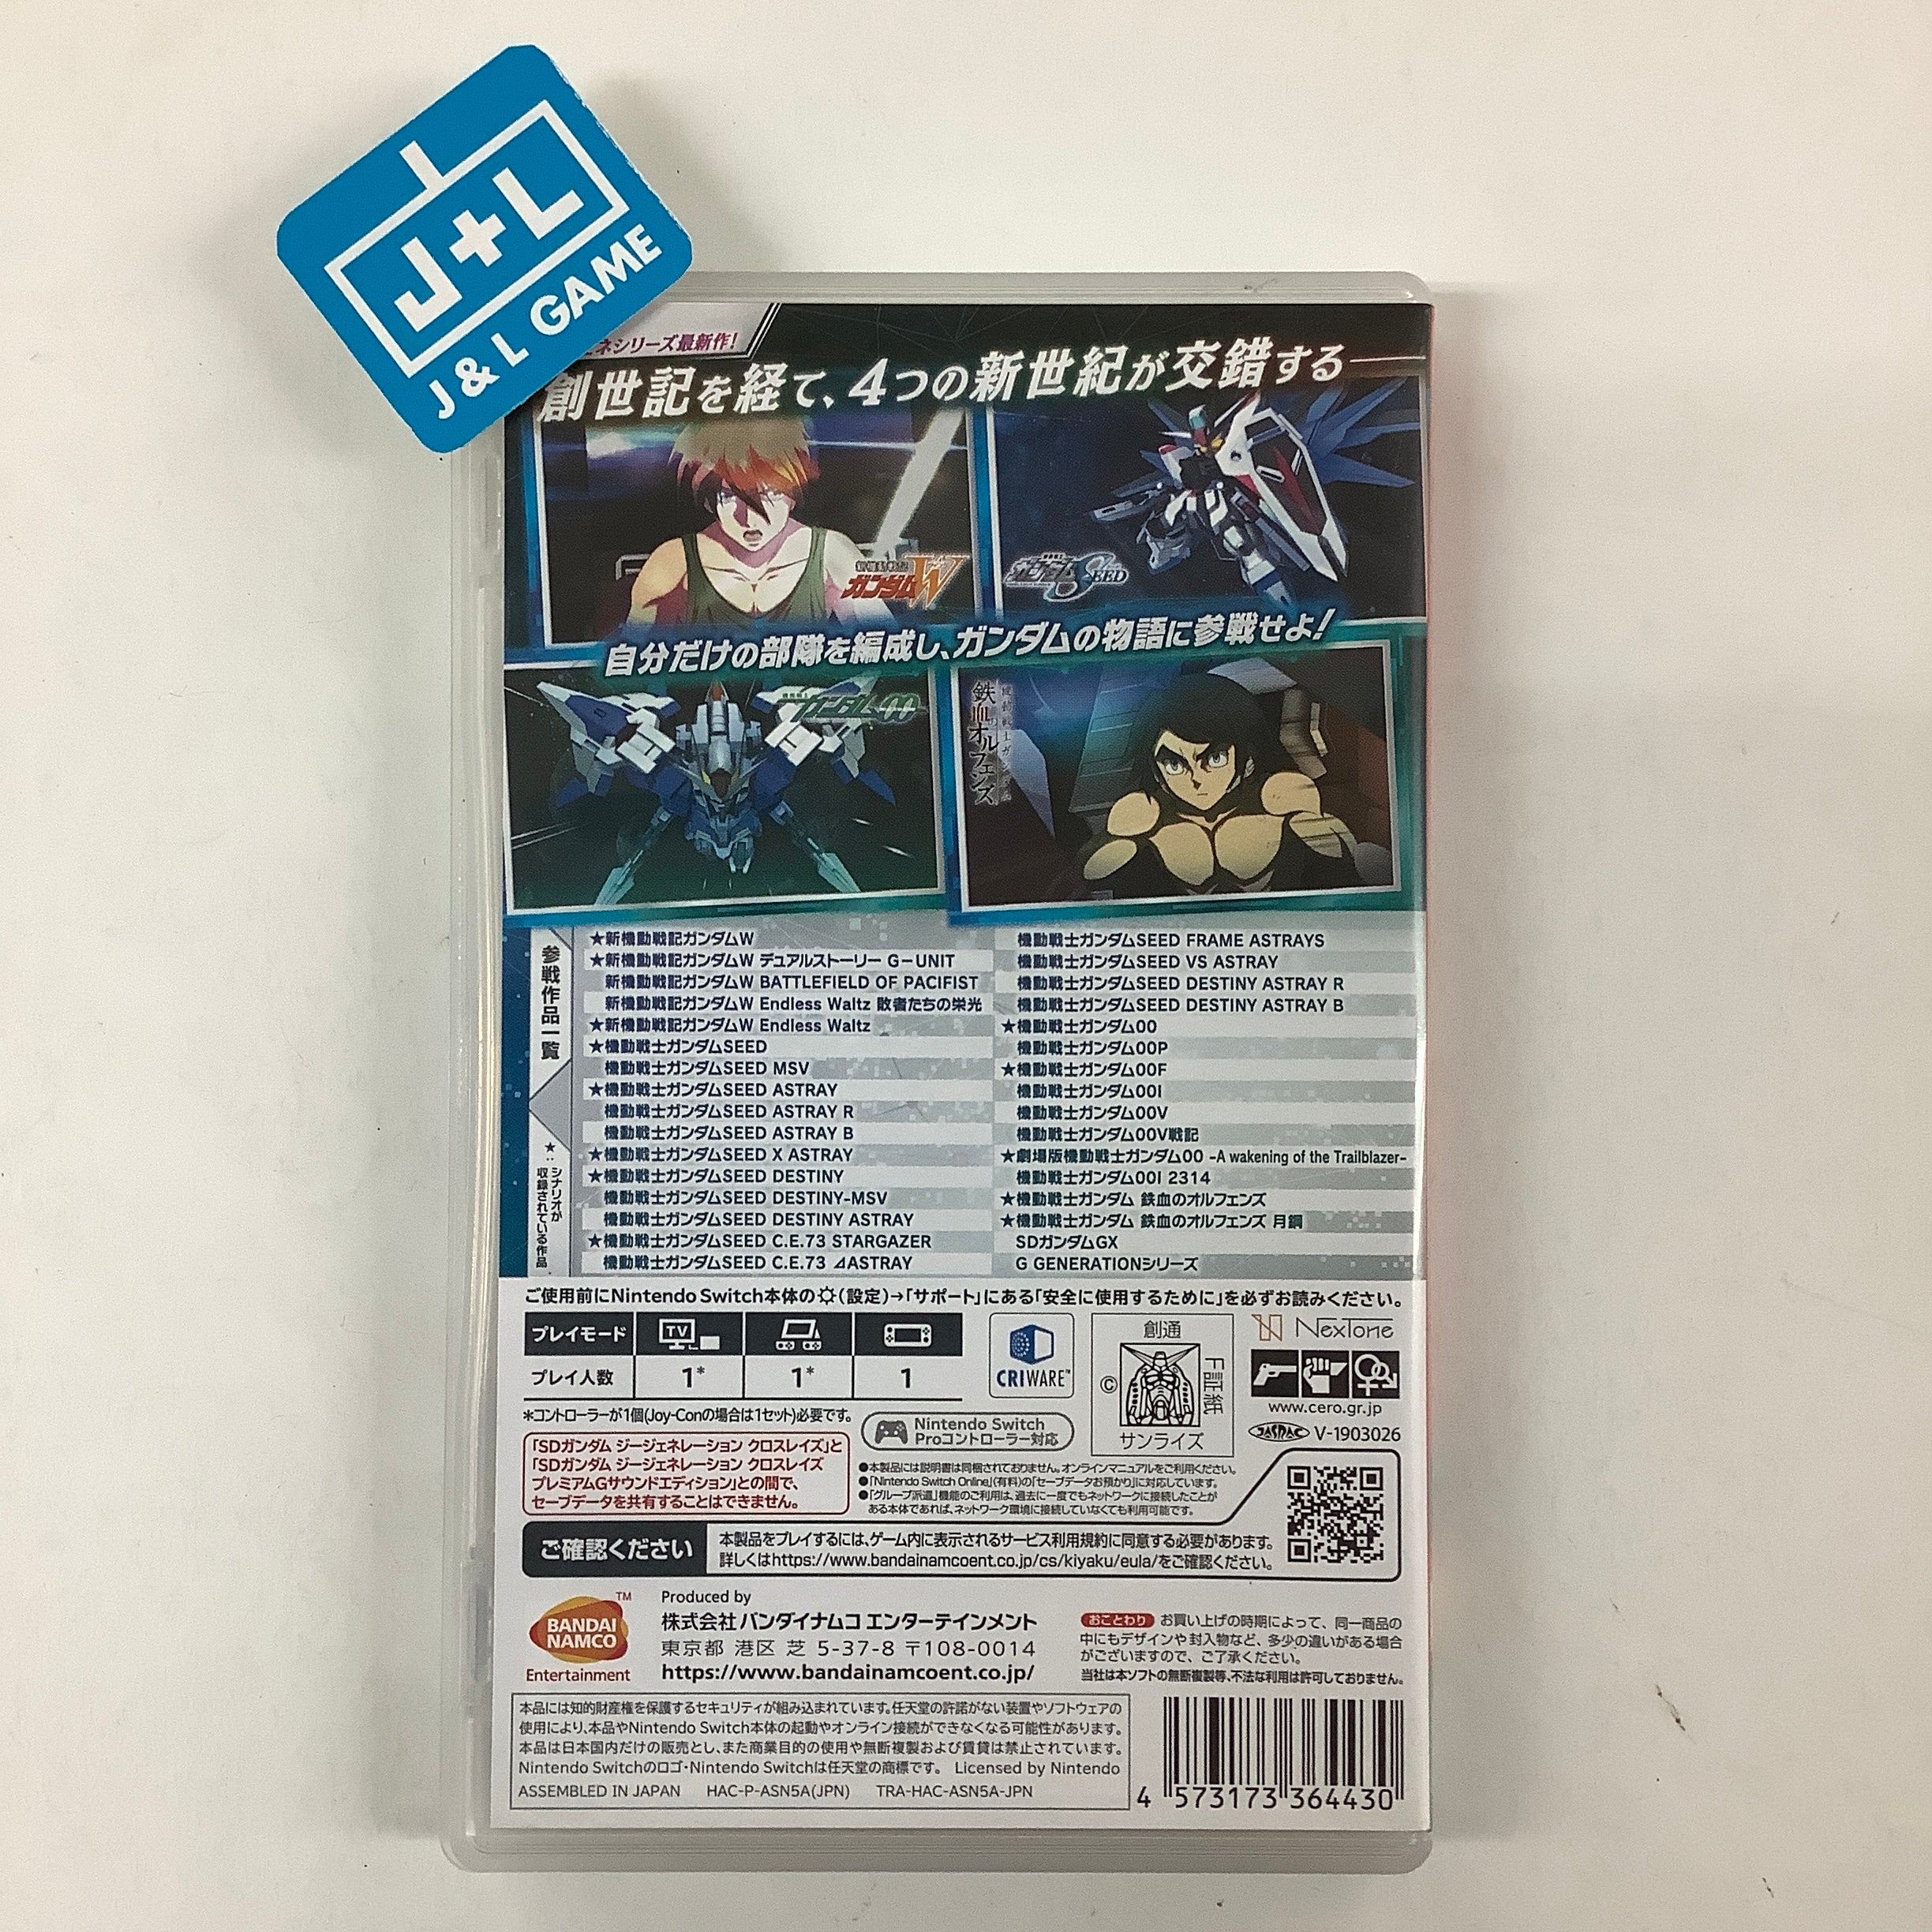 SD Gundam G Generation Cross Rays - (NSW) Nintendo Switch [Pre-Owned] (Japanese Import) Video Games Bandai Namco Games   